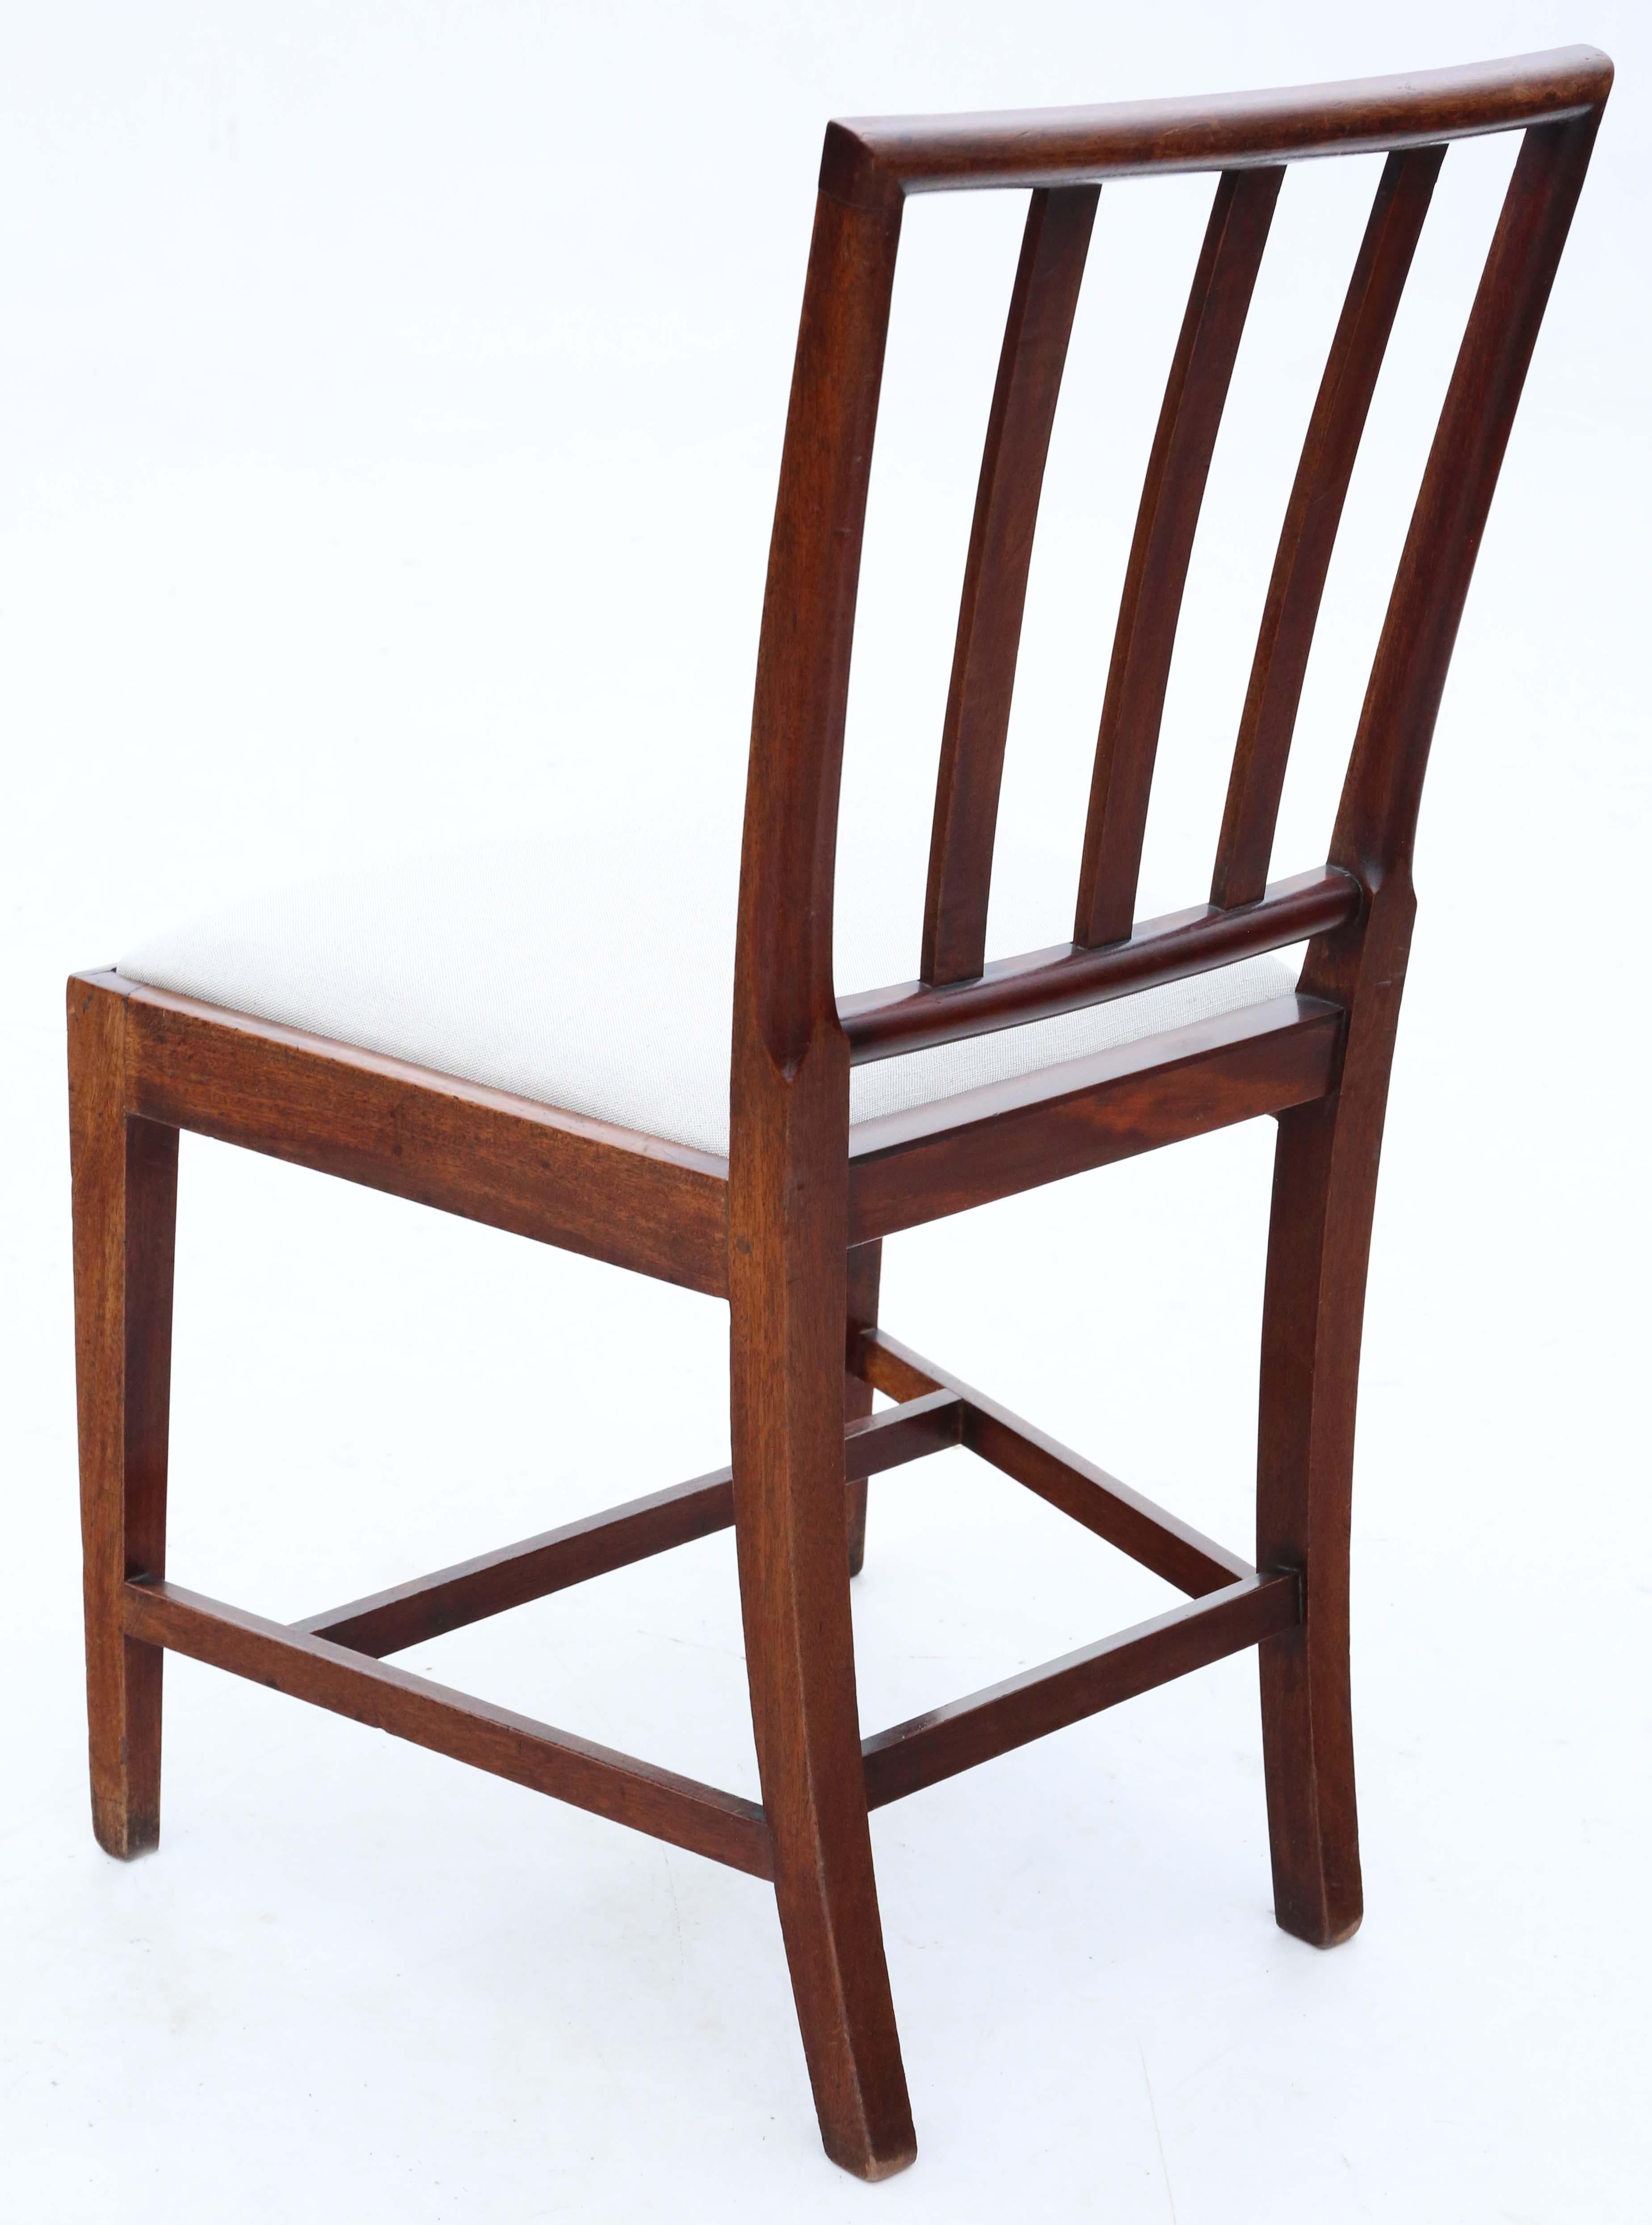 Regency Mahogany Dining Chairs: Set of 8 (6+2), Antique Quality, Early 19th C 4